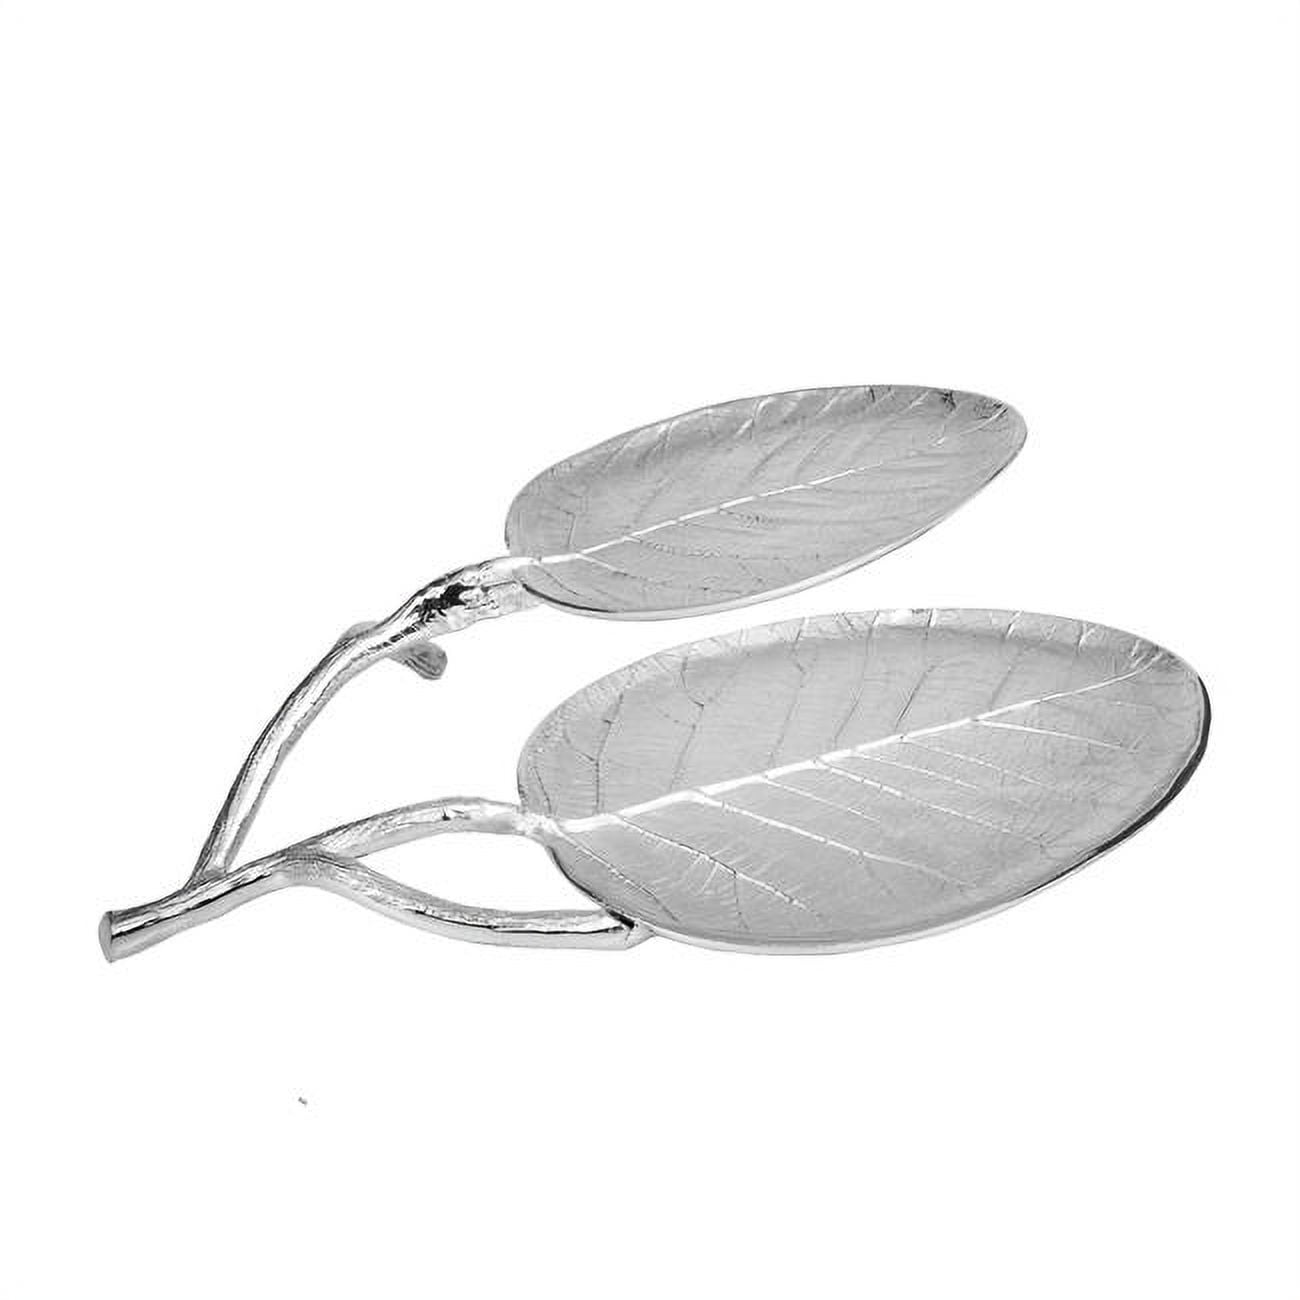 Classic Touch Le946 Nickel Leaf 2 Bowl Relish Dish, 14.5 X 11.25 X 2.75 In.